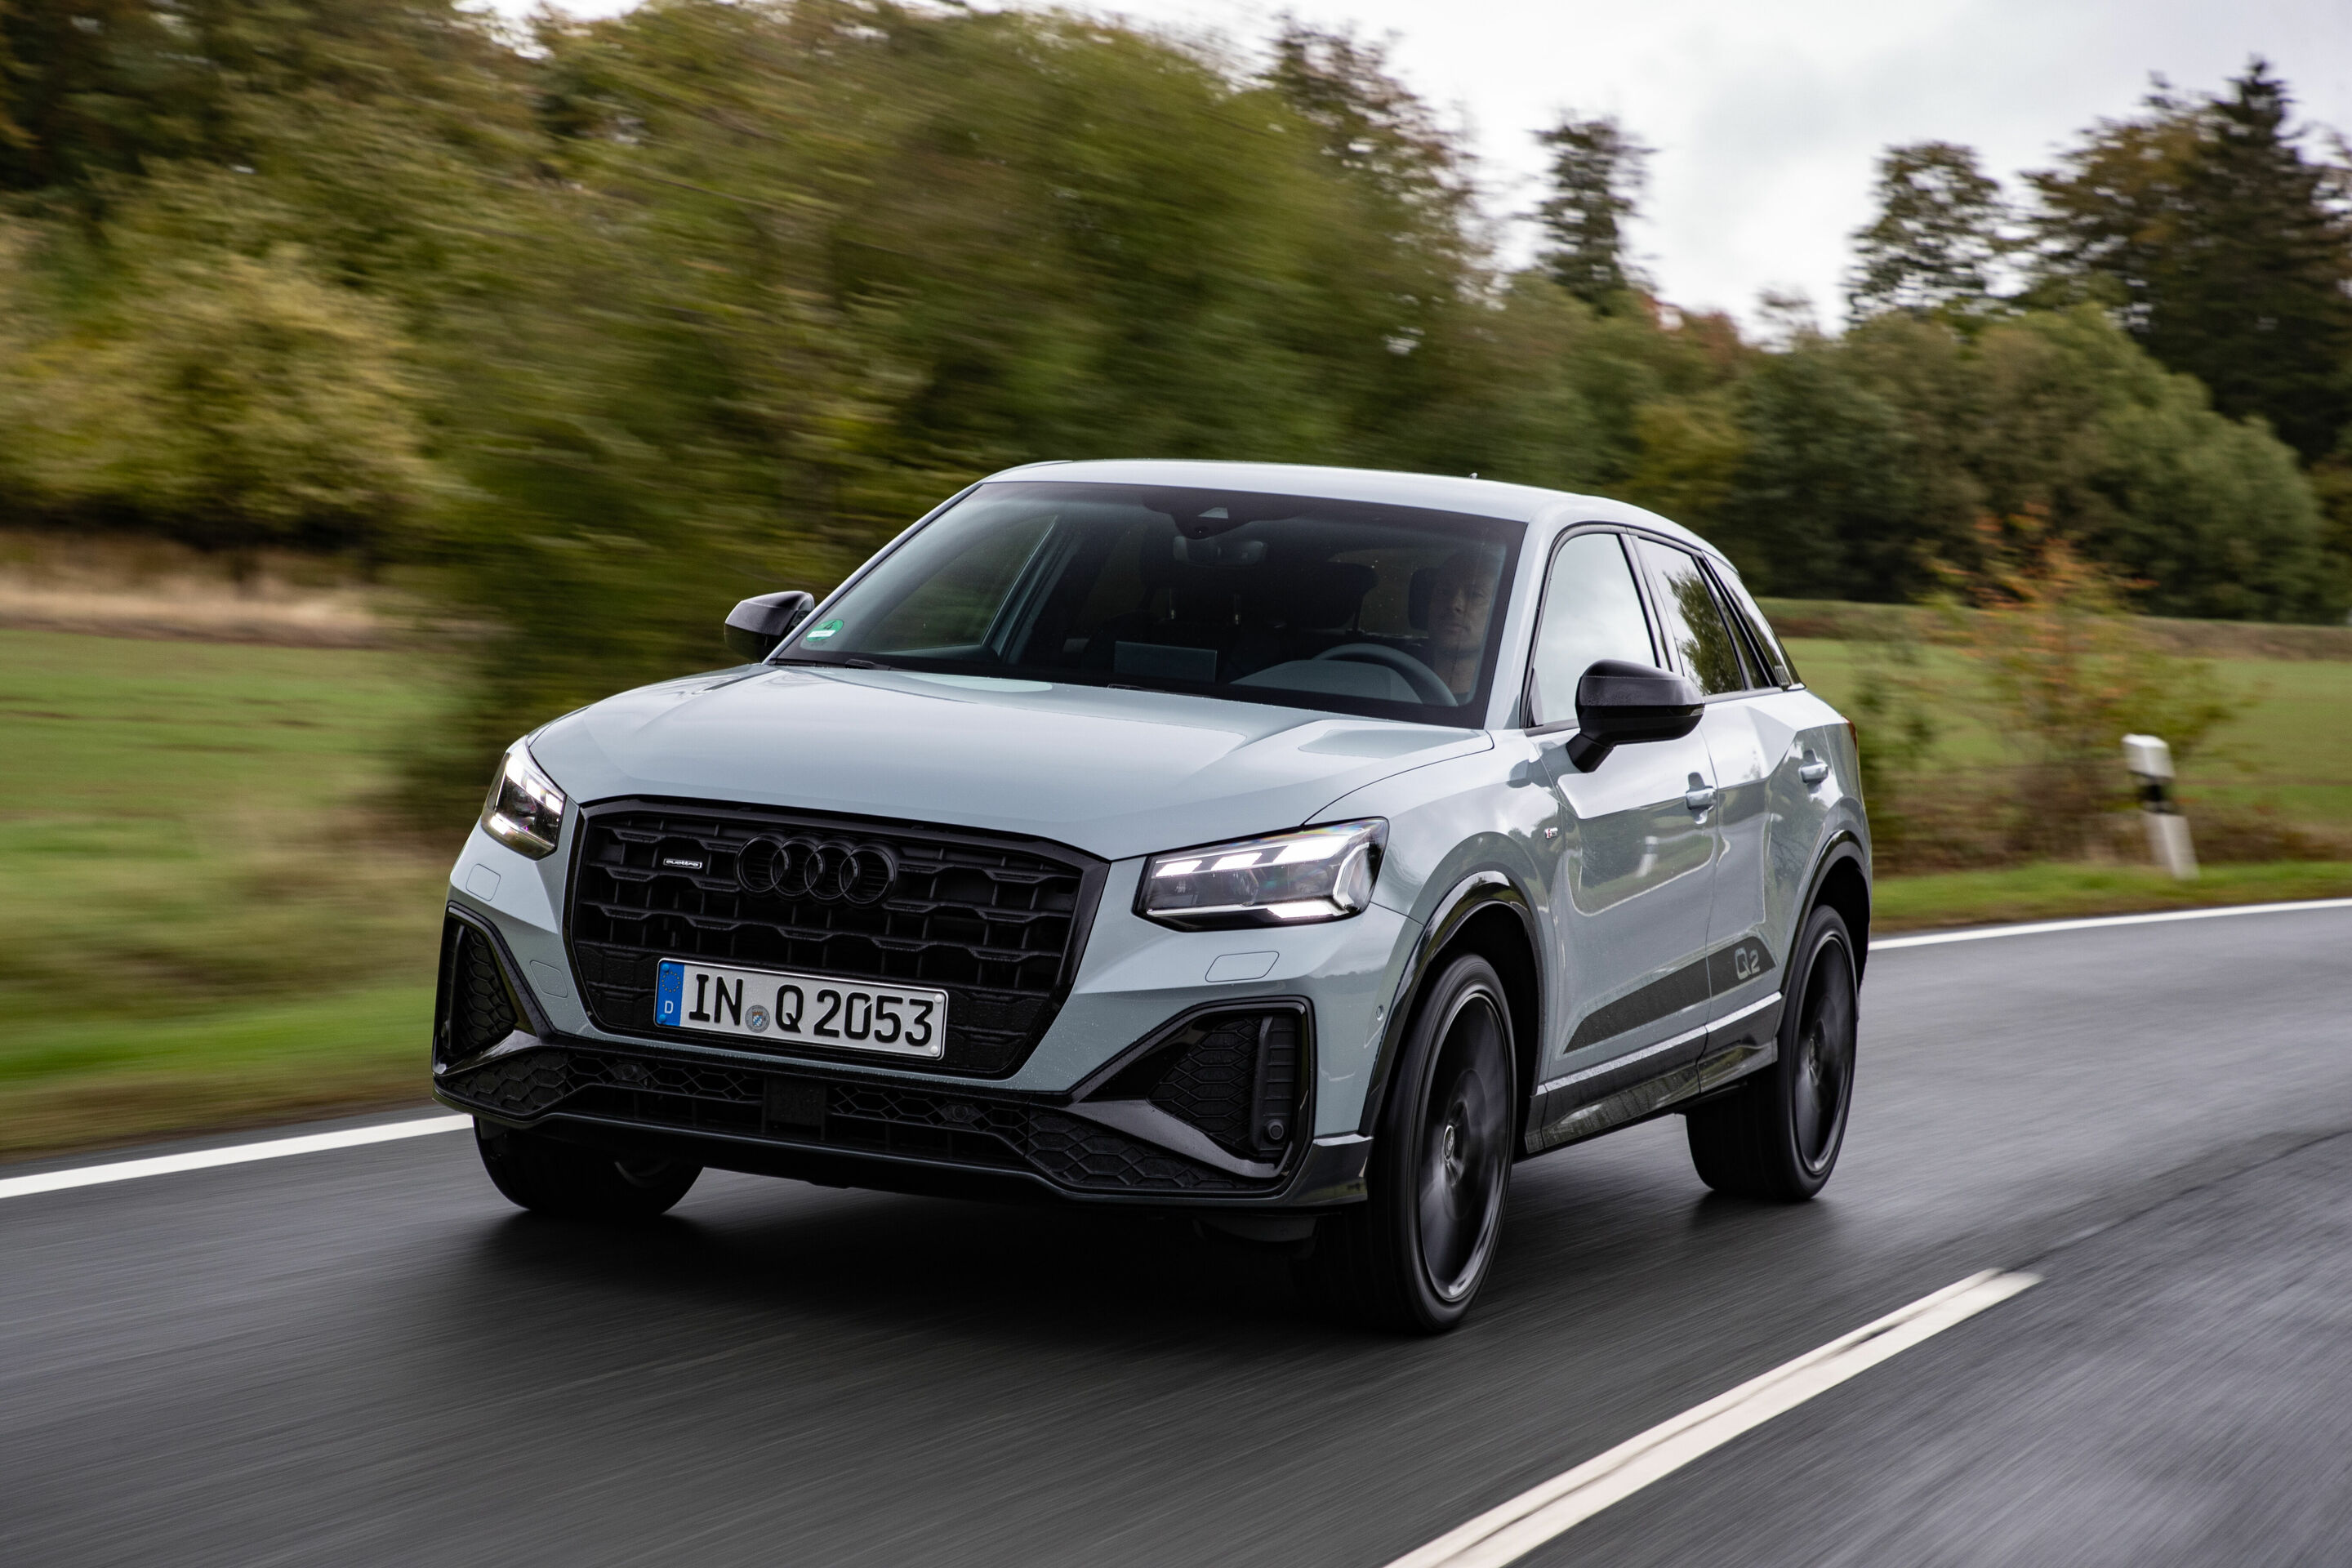 Small Q, big coup: The Audi Q2 in new top form